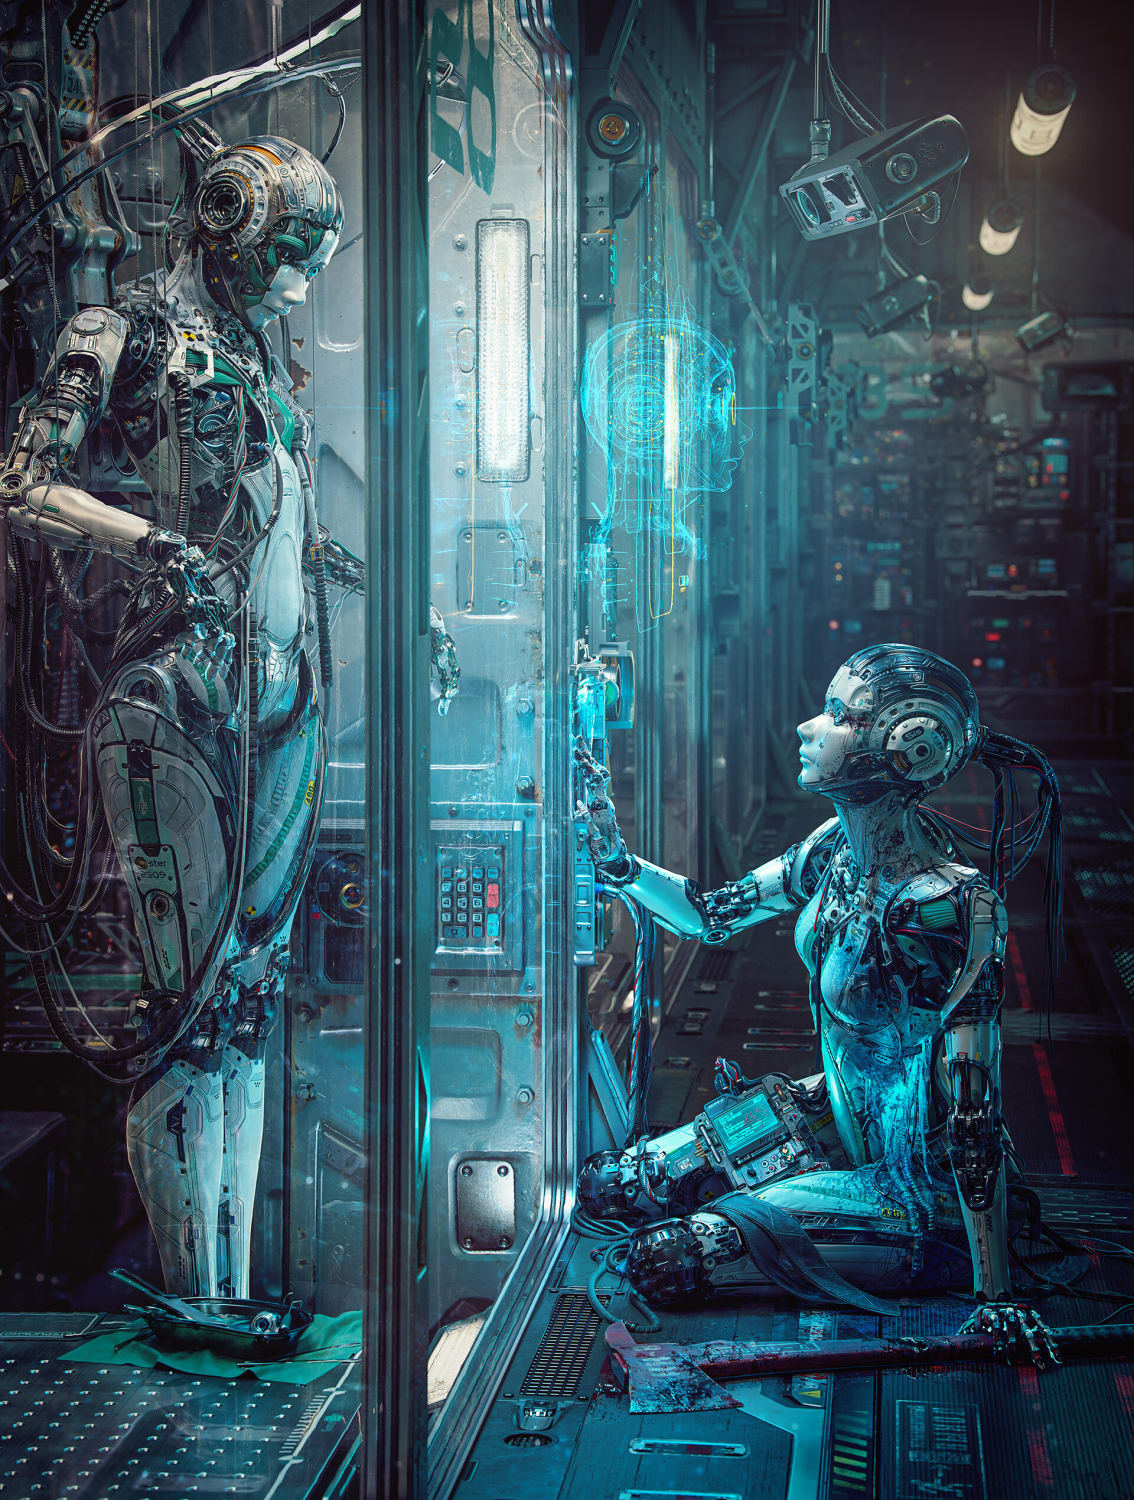 This crazy detailed artwork 'Sisters. Synthetic Compassion' by Michael Black, CG